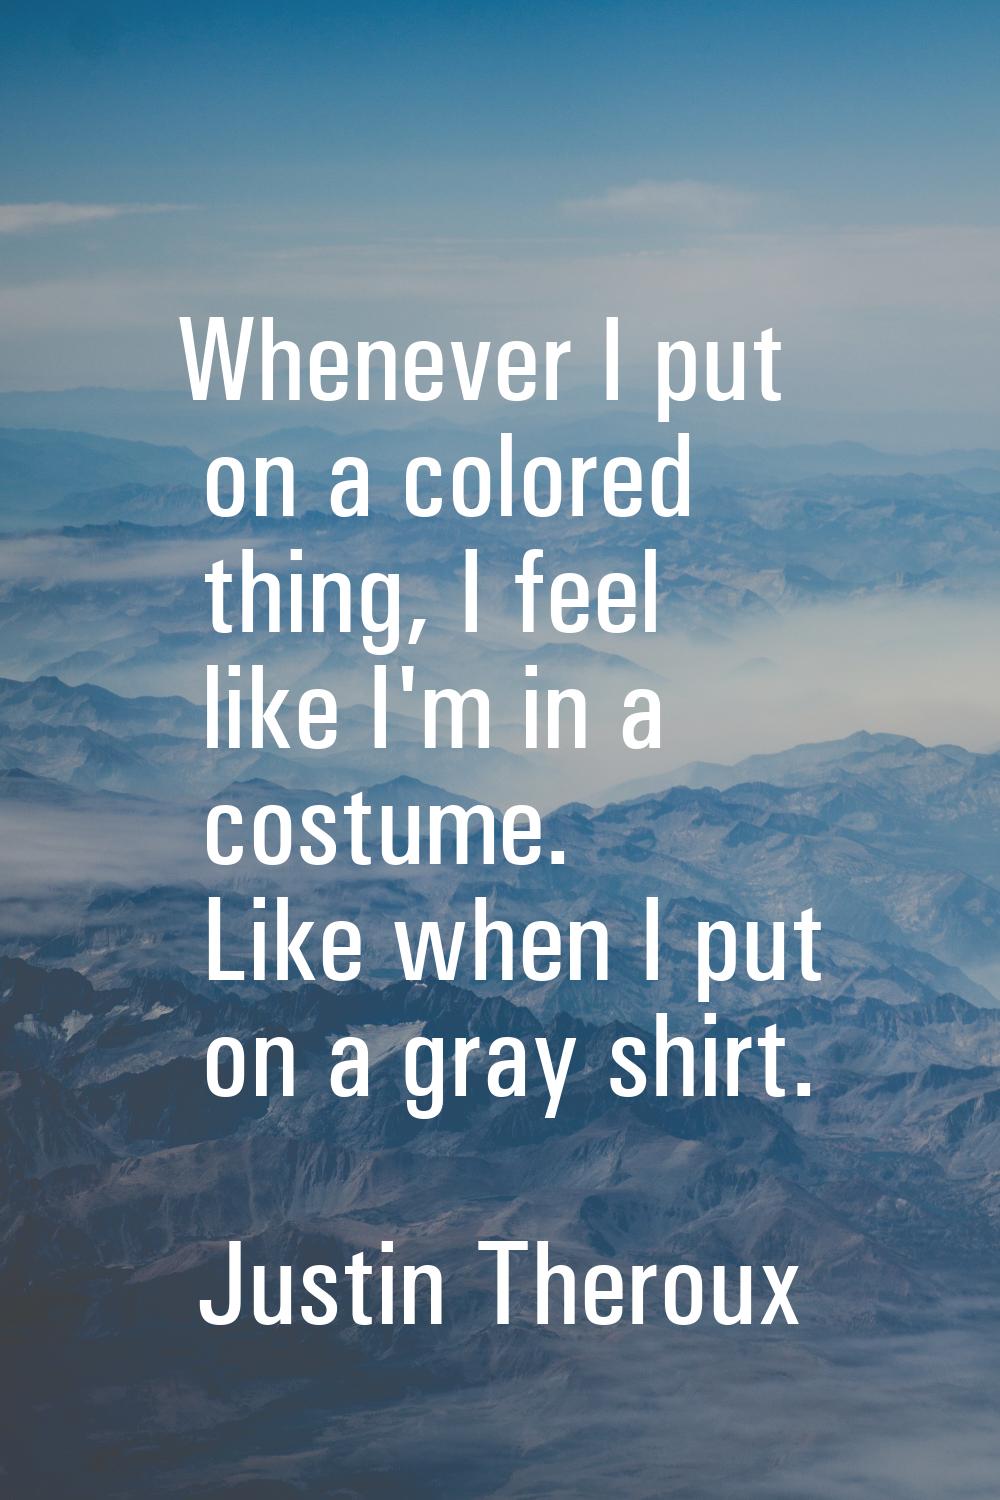 Whenever I put on a colored thing, I feel like I'm in a costume. Like when I put on a gray shirt.